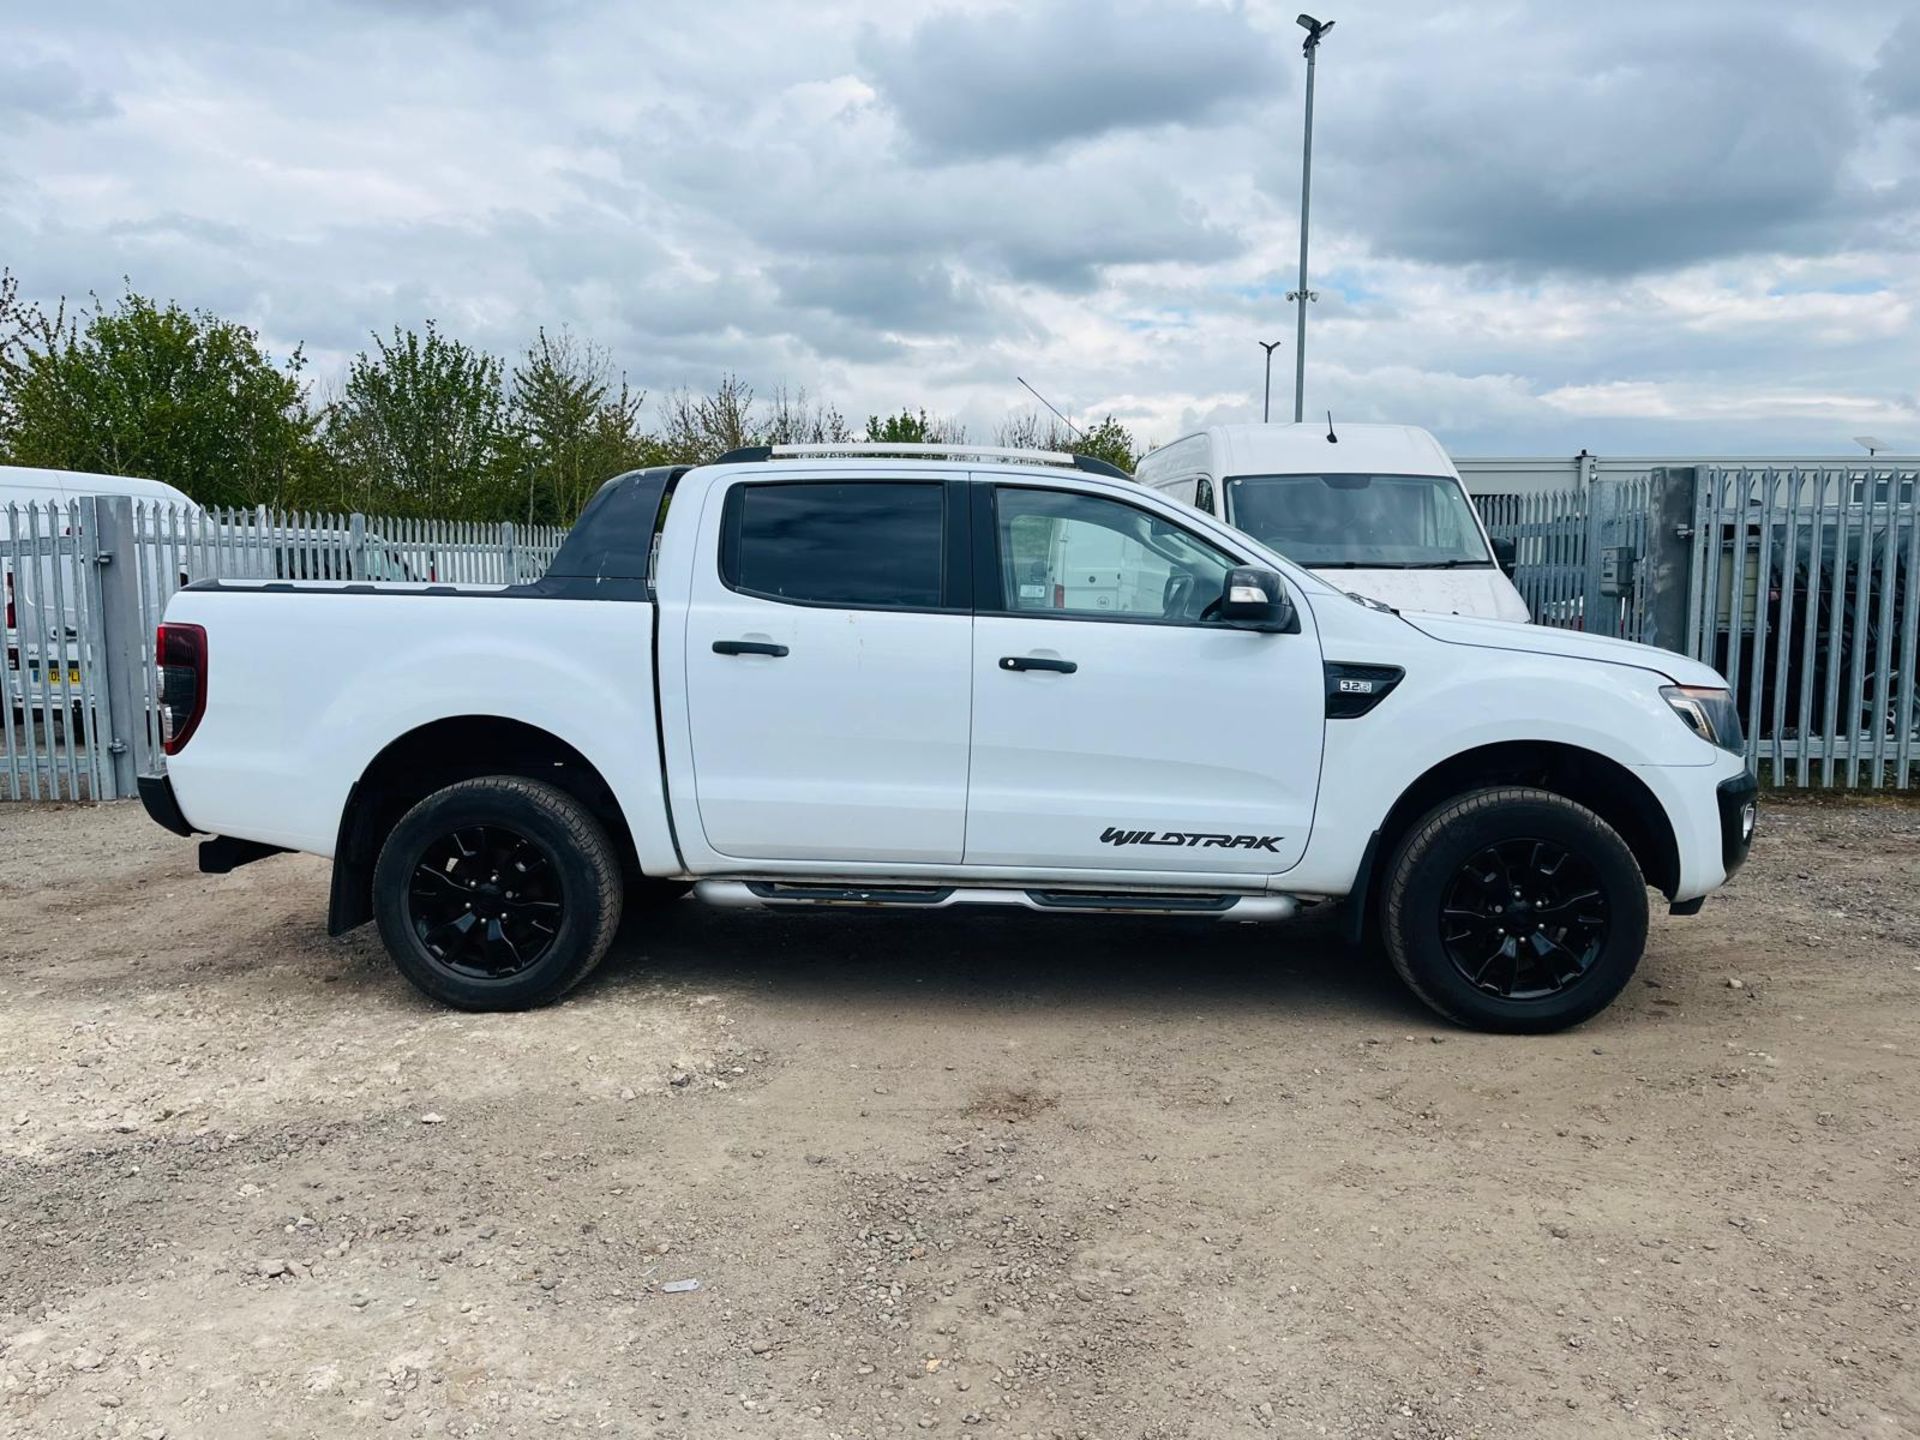 ** ON SALE ** Ford Ranger Wildtrak 3.2 TDCI 200 Automatic 2014 '64 Reg' 4WD - A/C - No Vat - Image 11 of 33